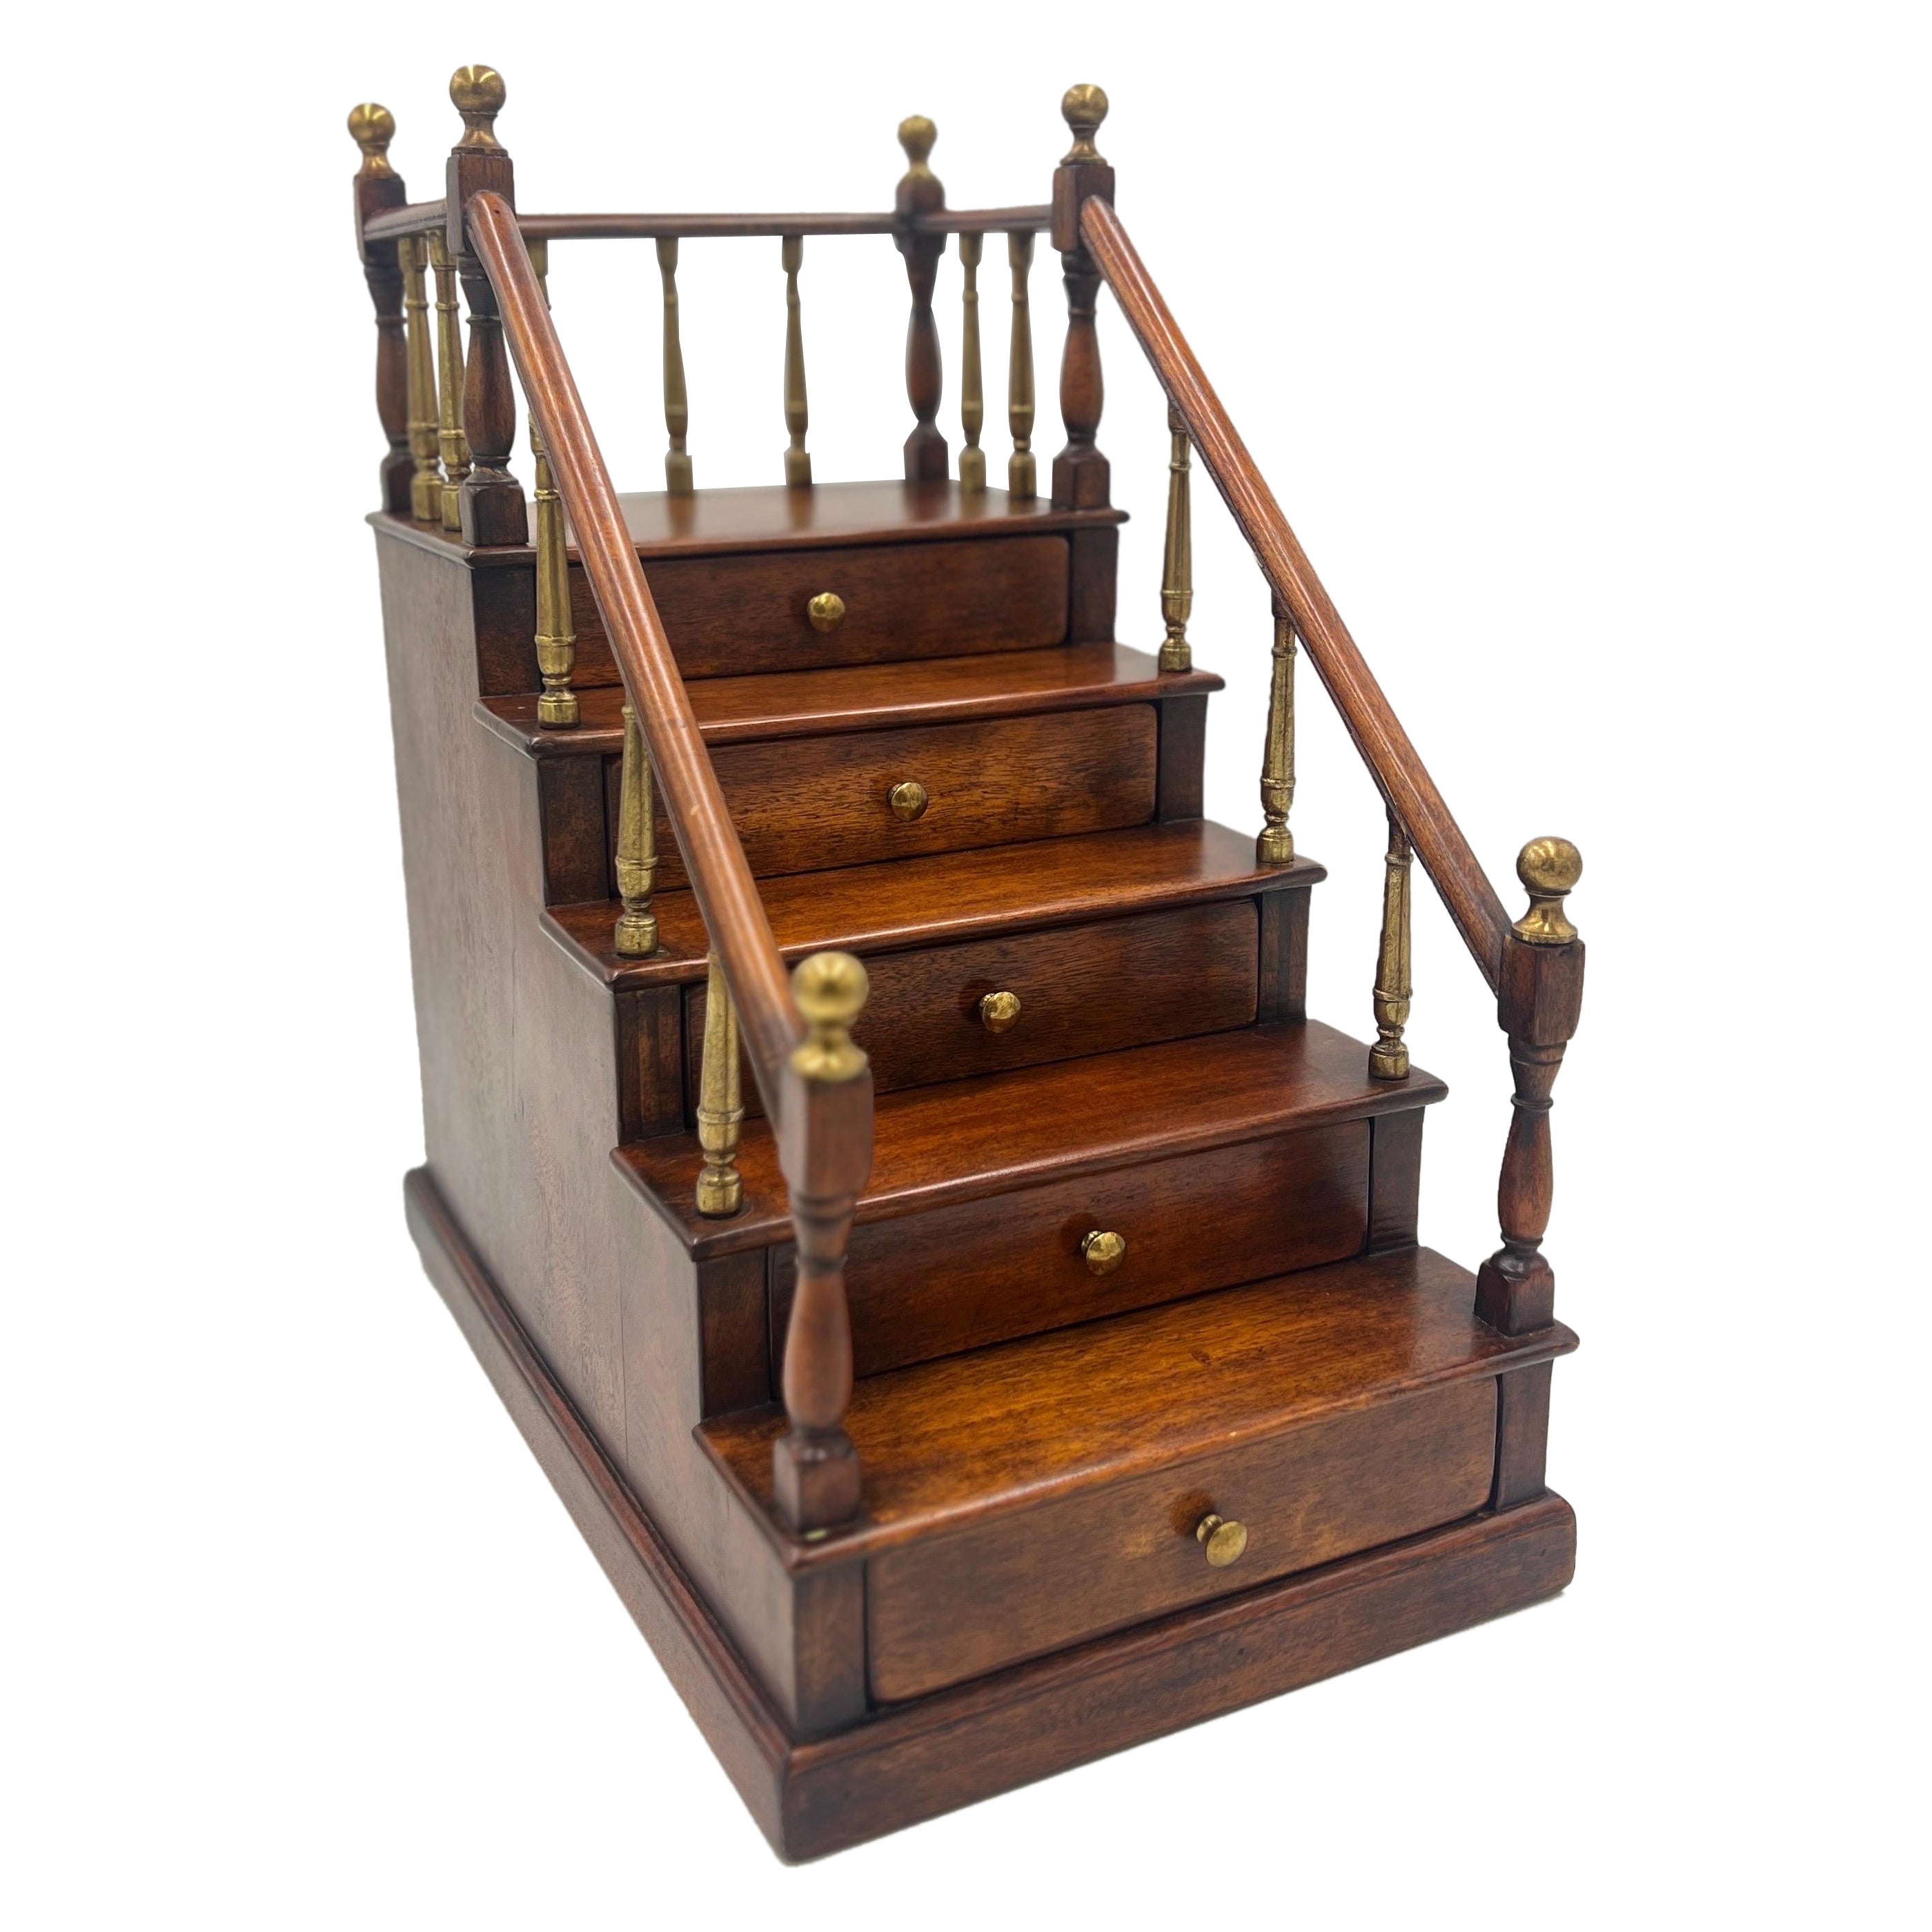 Antique Edwardian Mahogany Staircase Model with Brass Finial Newel Posts